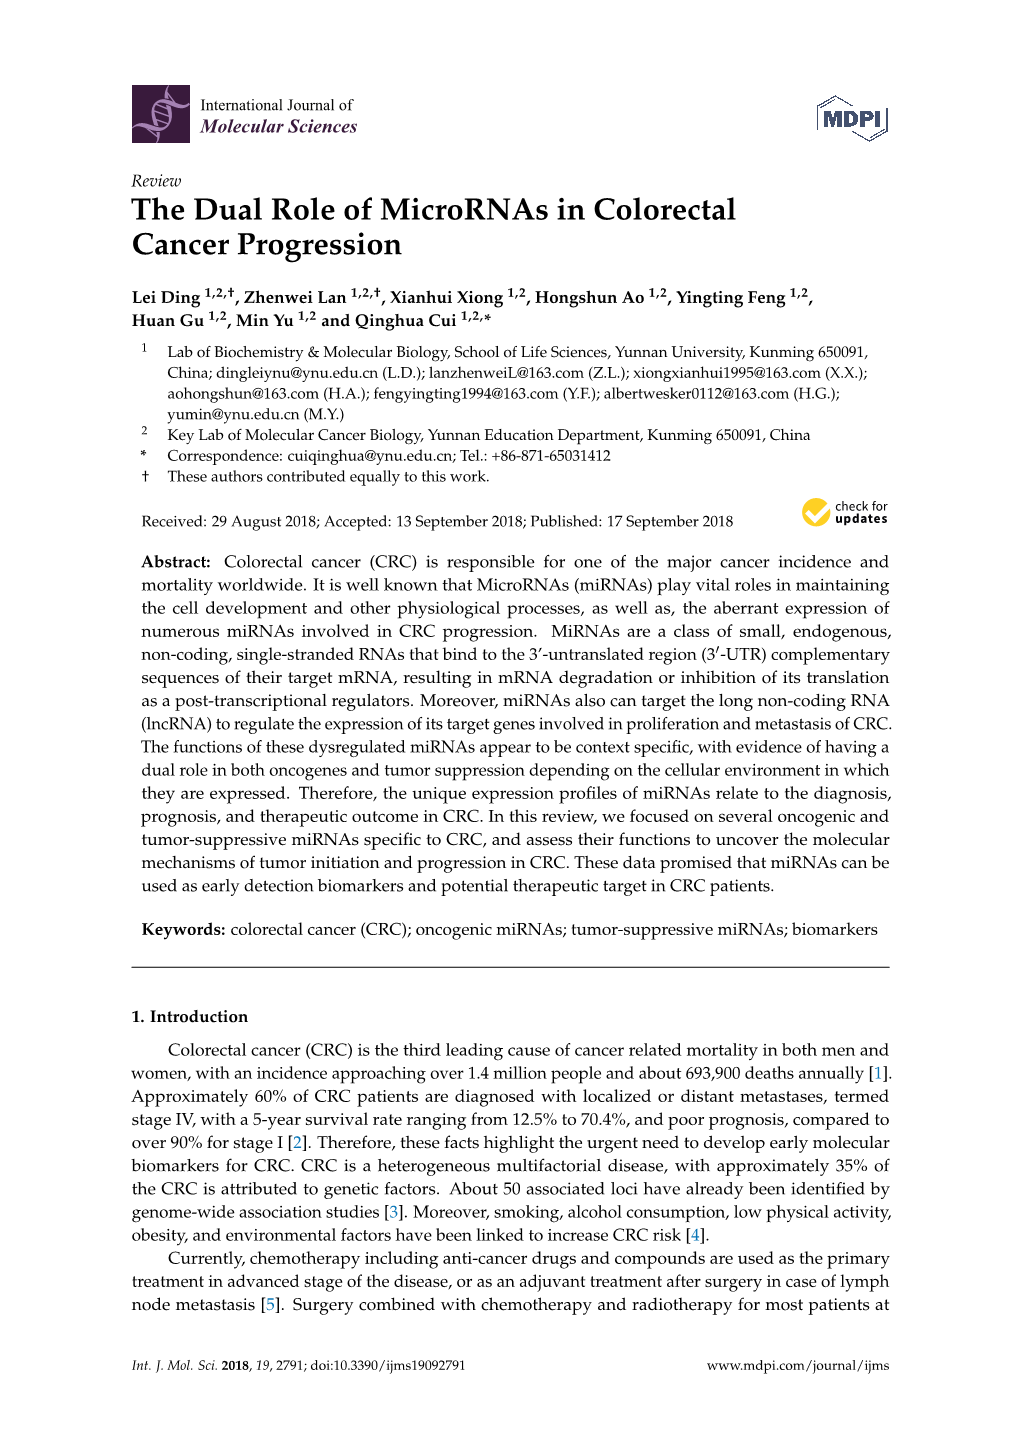 The Dual Role of Micrornas in Colorectal Cancer Progression